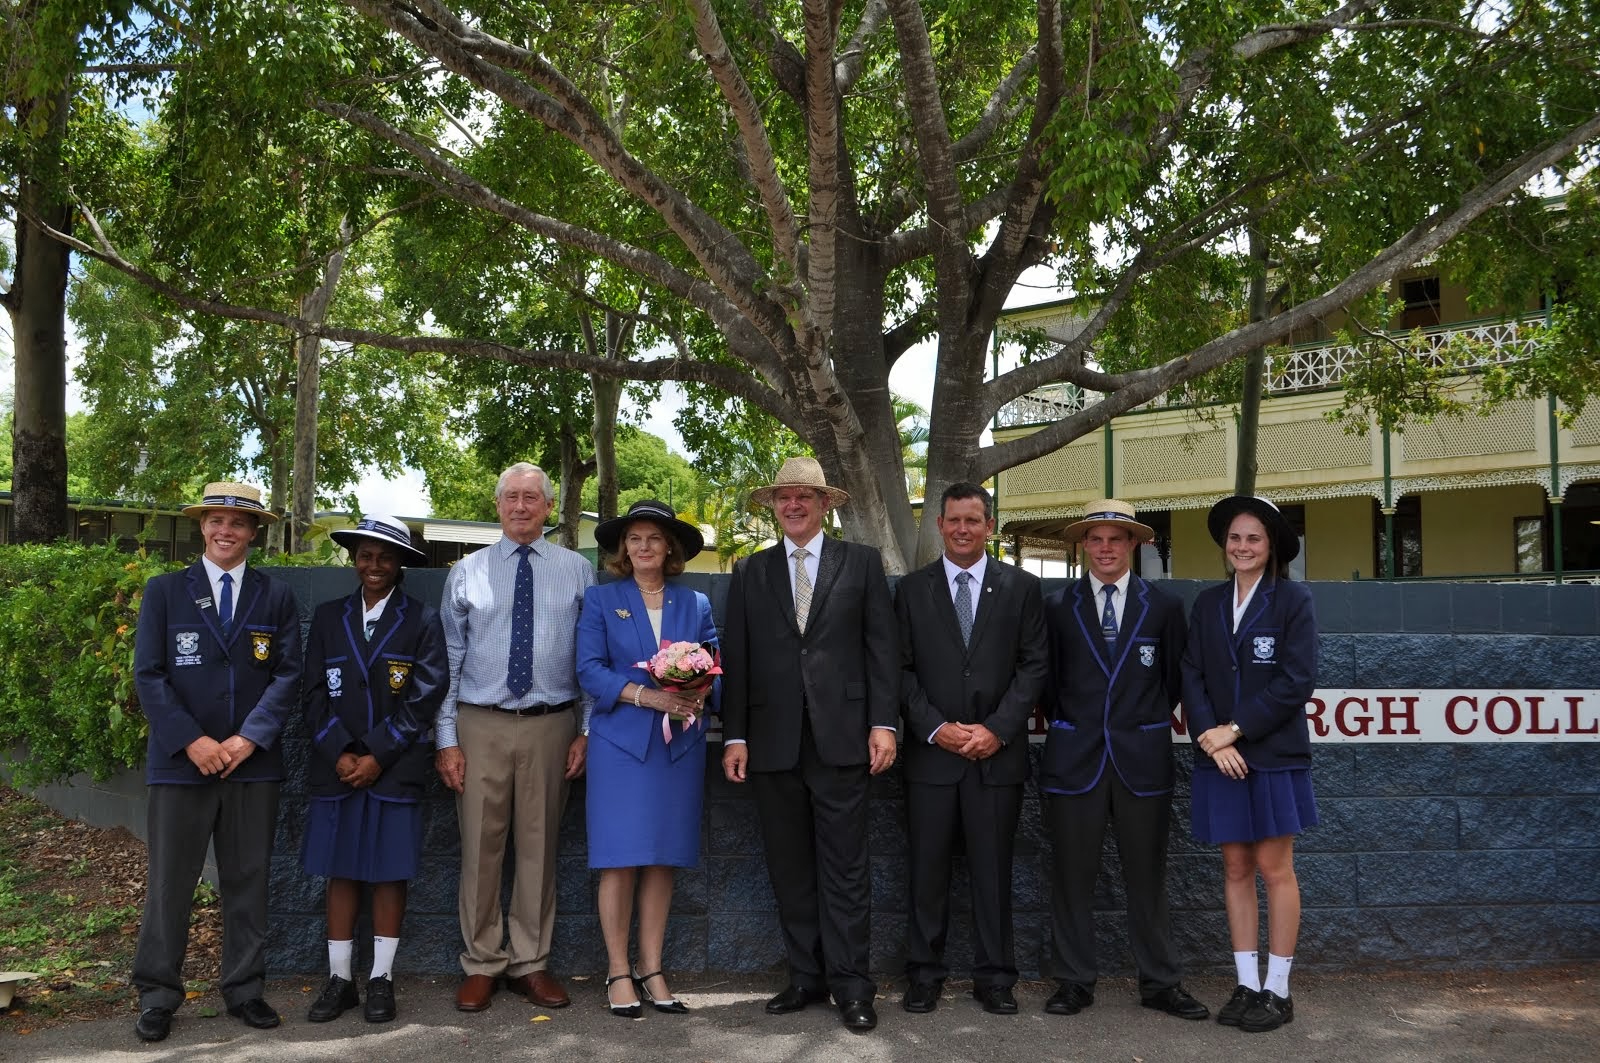 Her Excellency ,the Governor of Queensland, Ms Penelope Wensley AC visits BTC